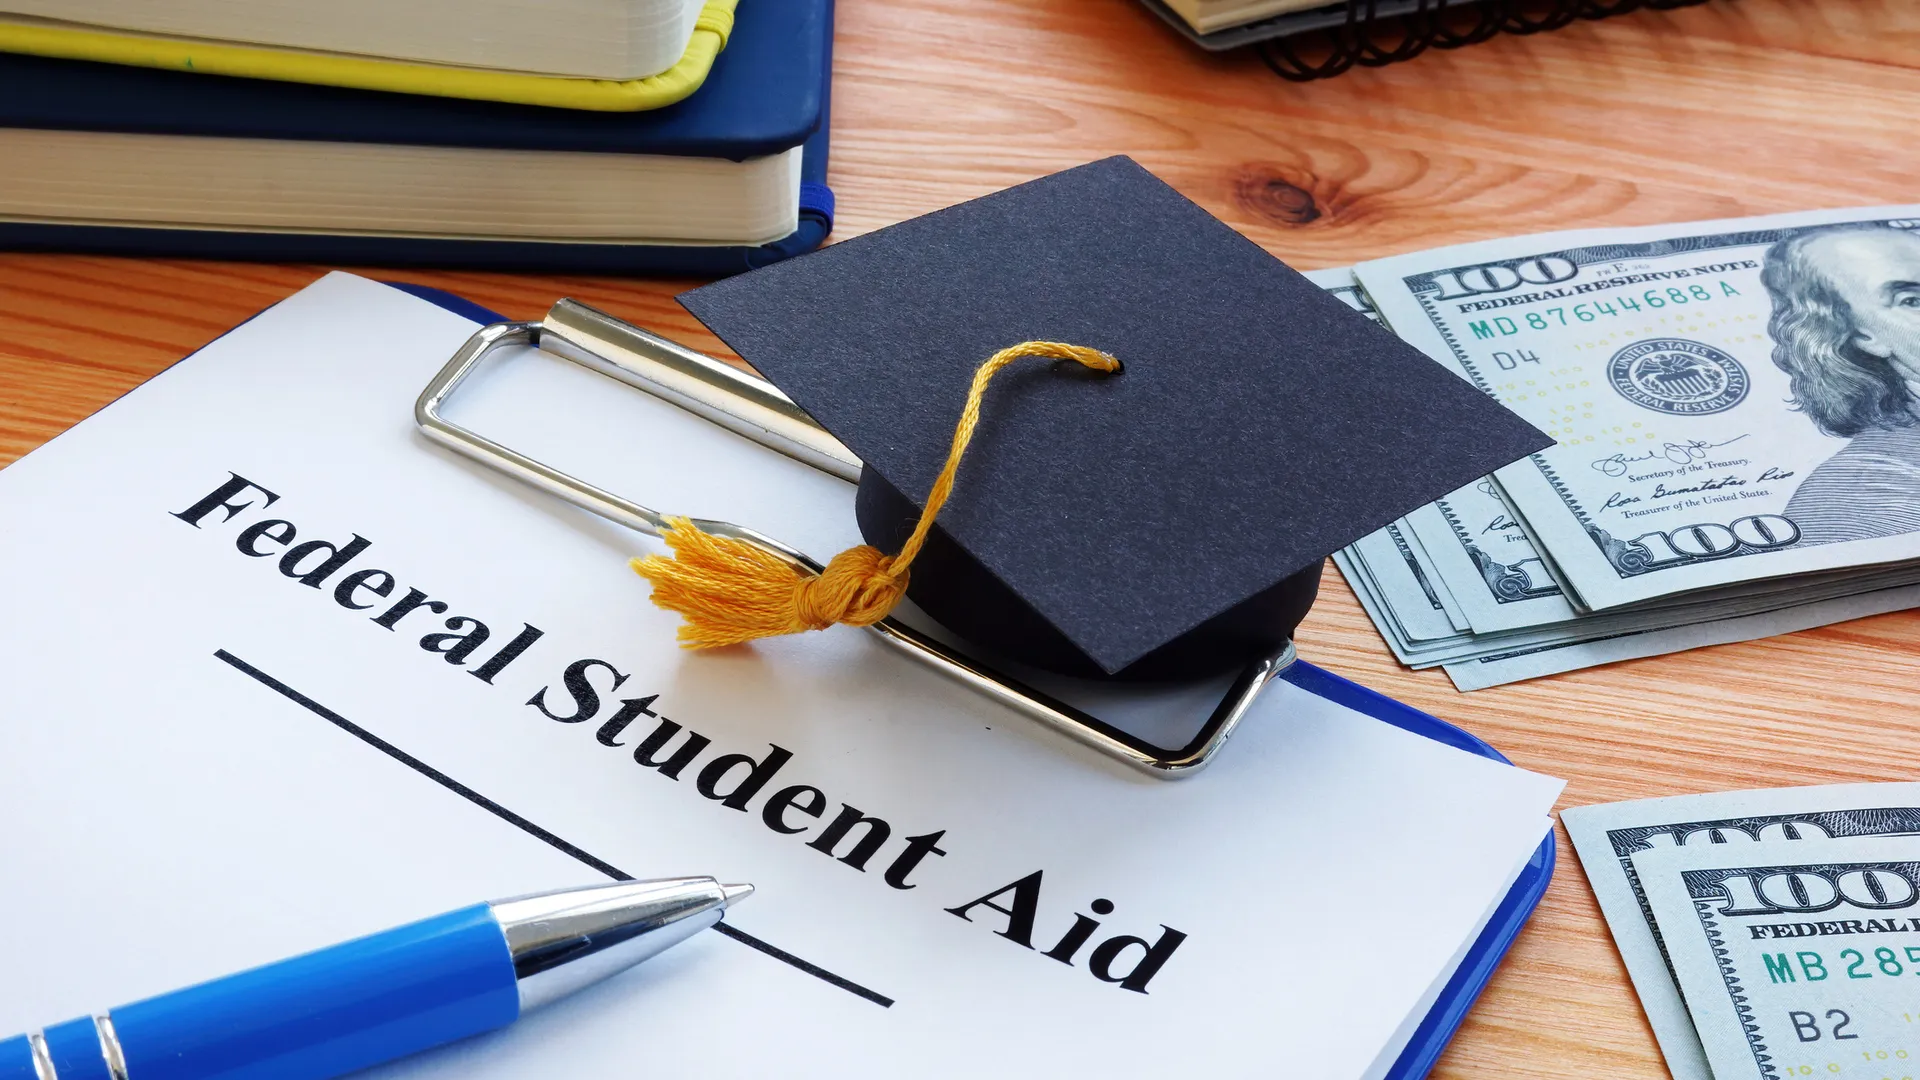 Federal student aid papers and small Square academic cap.